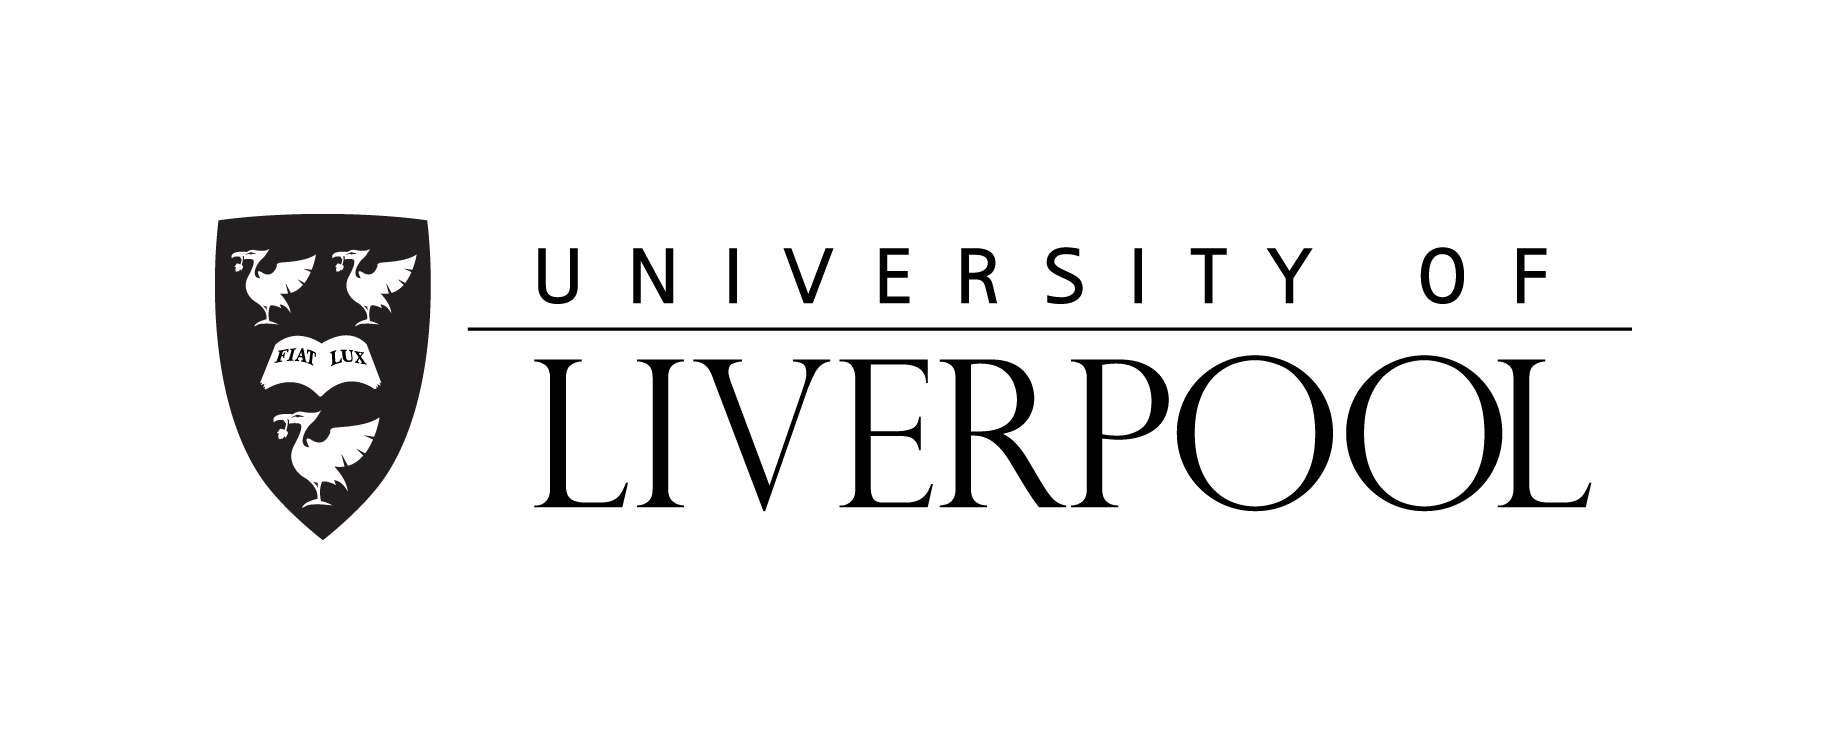 U of a Black and White Logo - The University of Liverpool